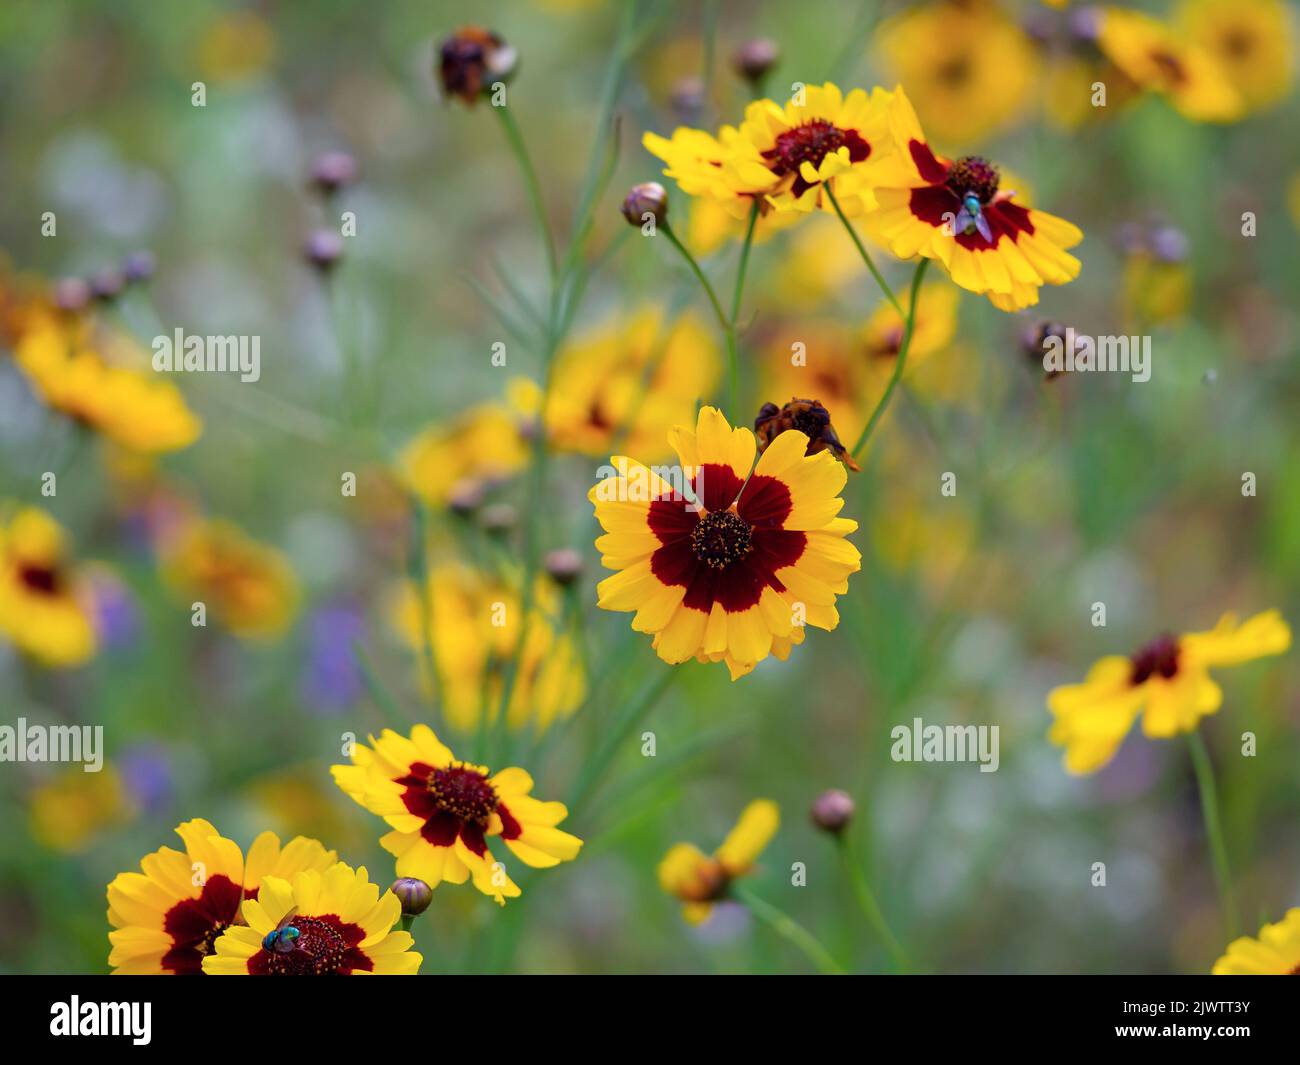 Lovely plains coreopsis flowers in an annual flower meadow Stock Photo